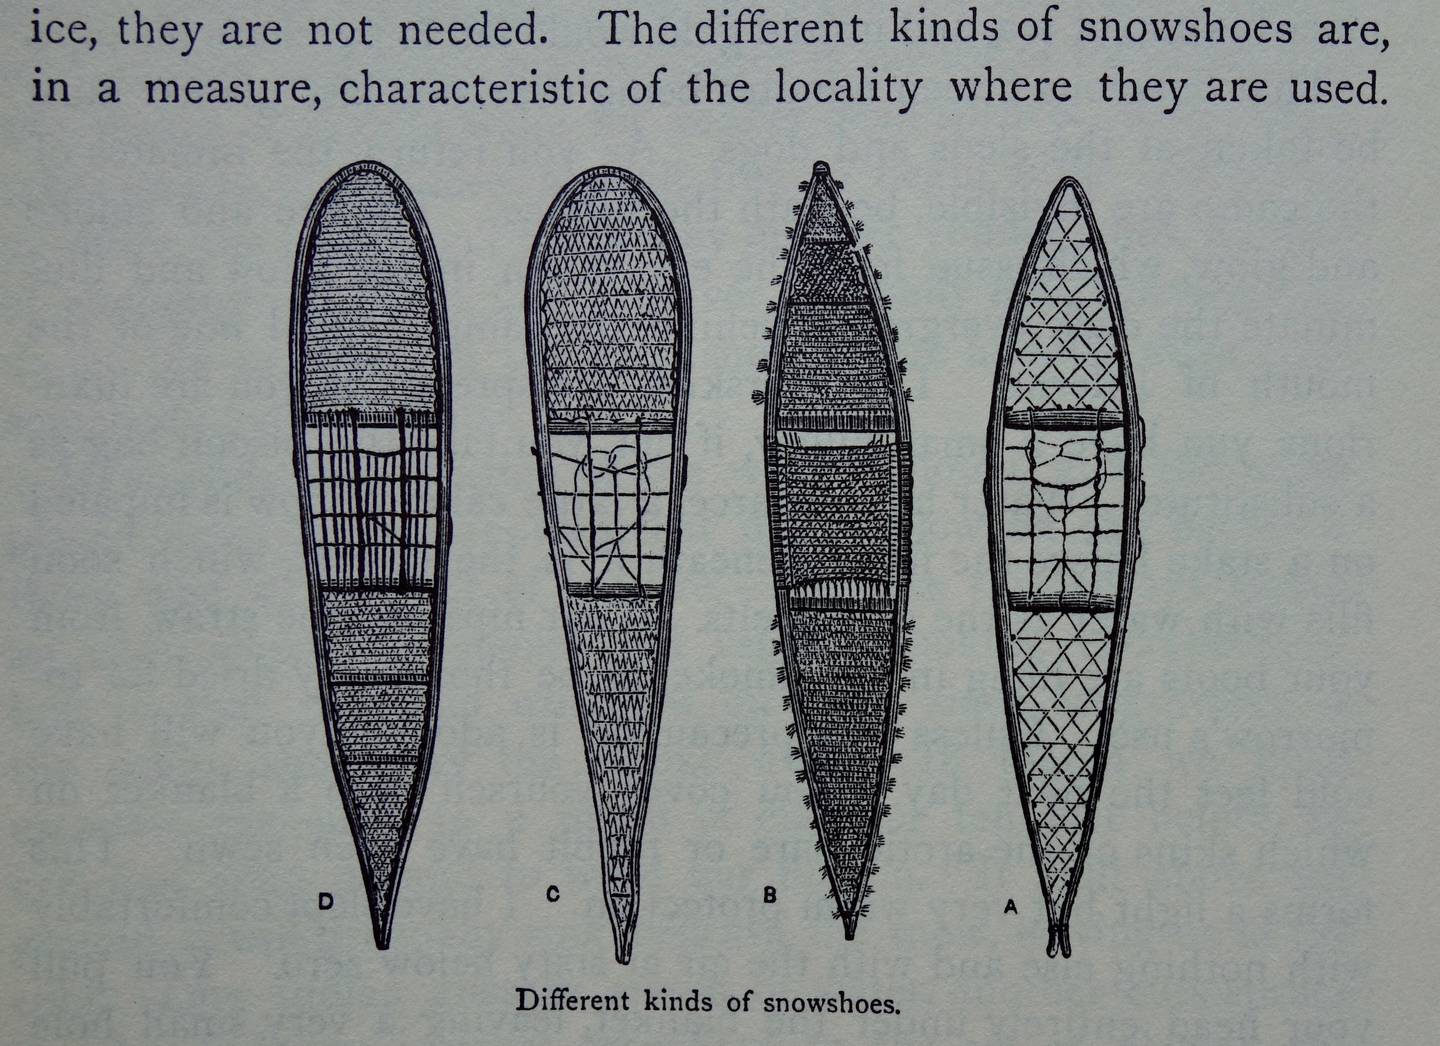 William Dall’s sketch of snowshoes he saw being used in Alaska